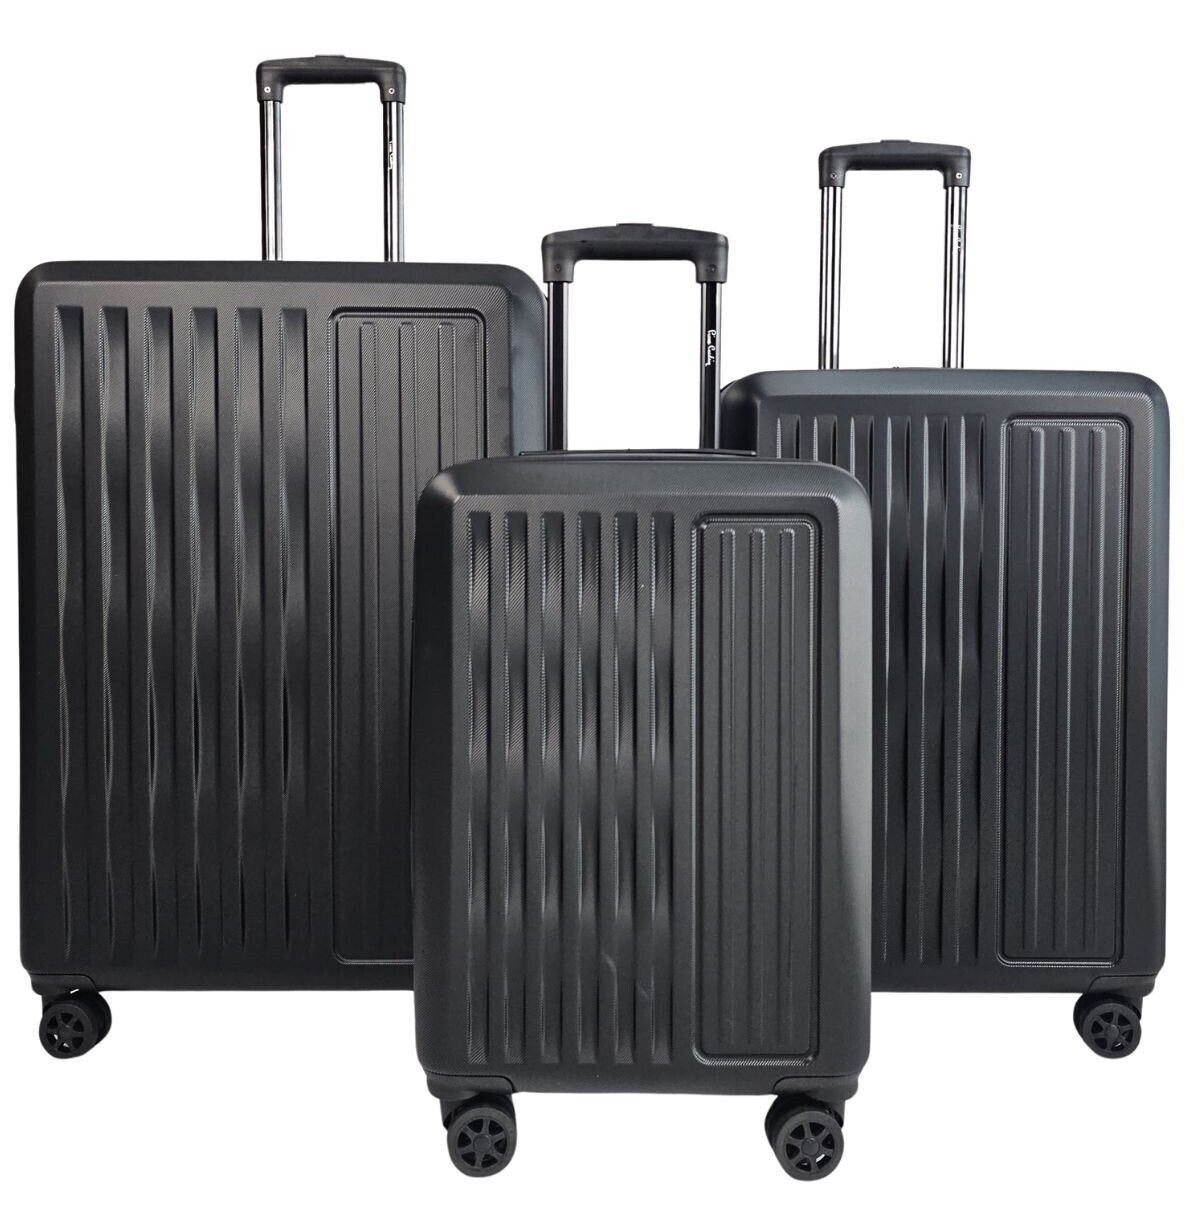 Cullman Set of 3 Hard Shell Suitcase in Black